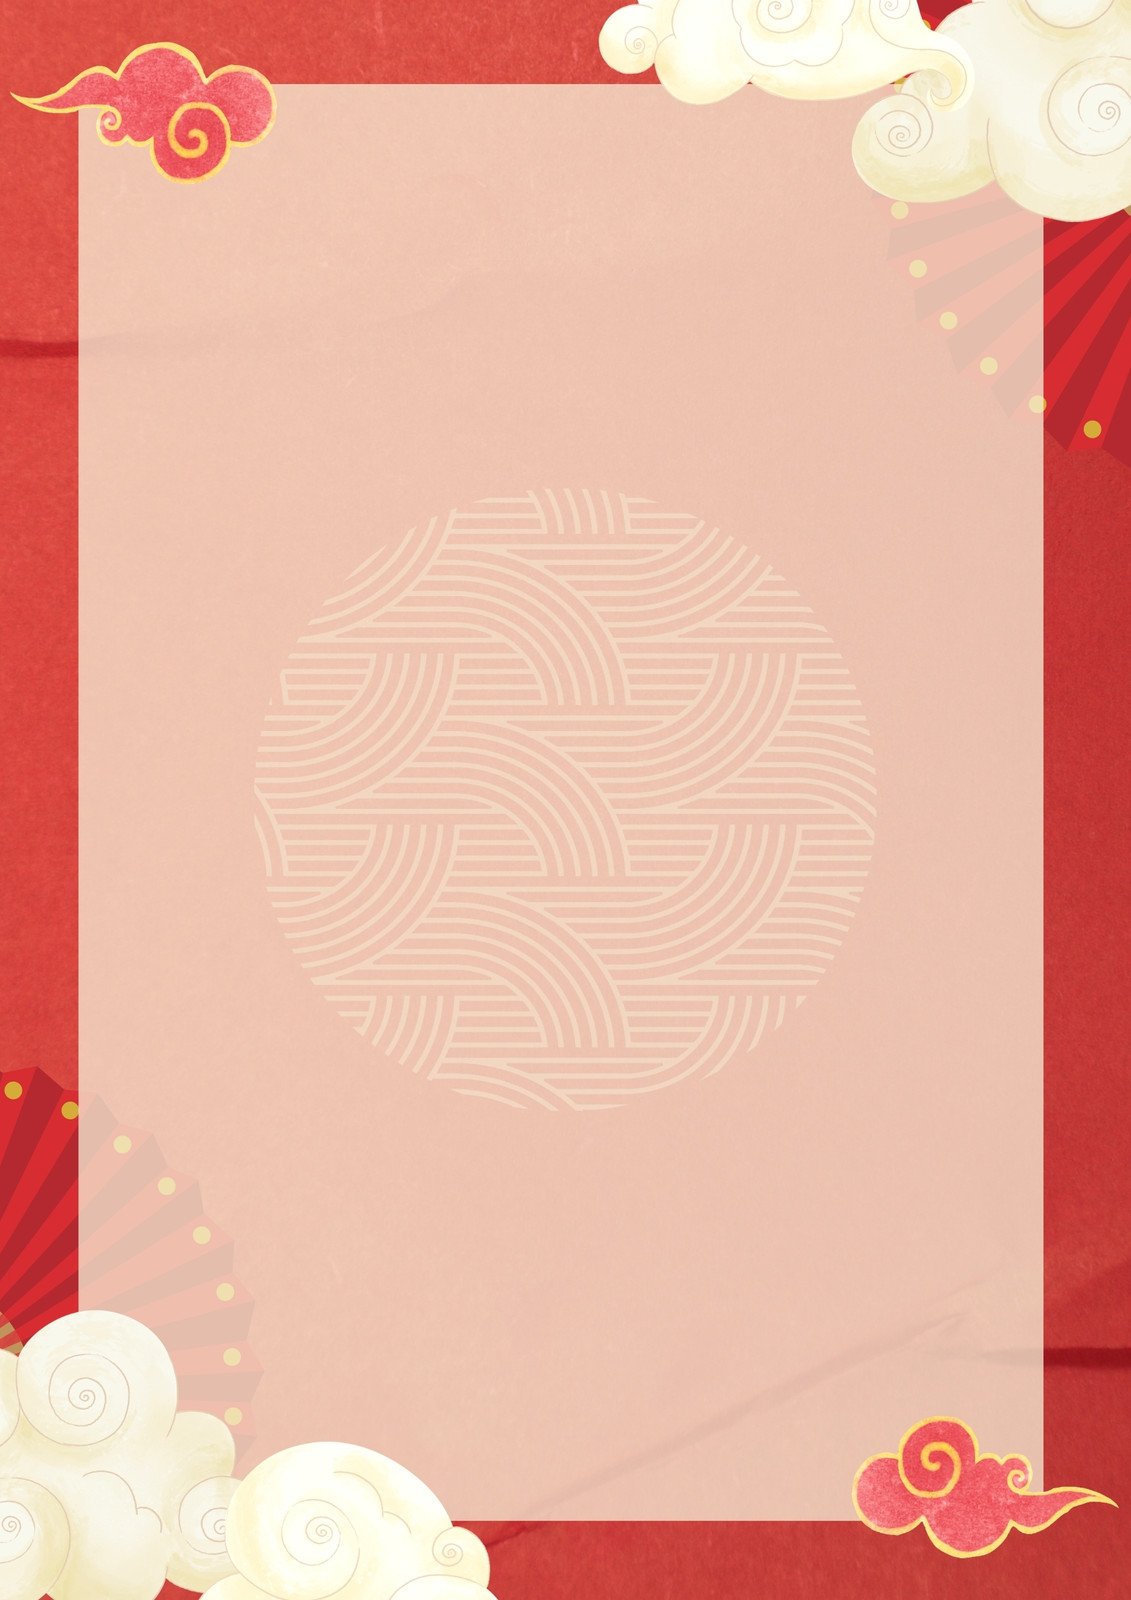 Red Background Chinese Style Border Print Ads Backgrounds